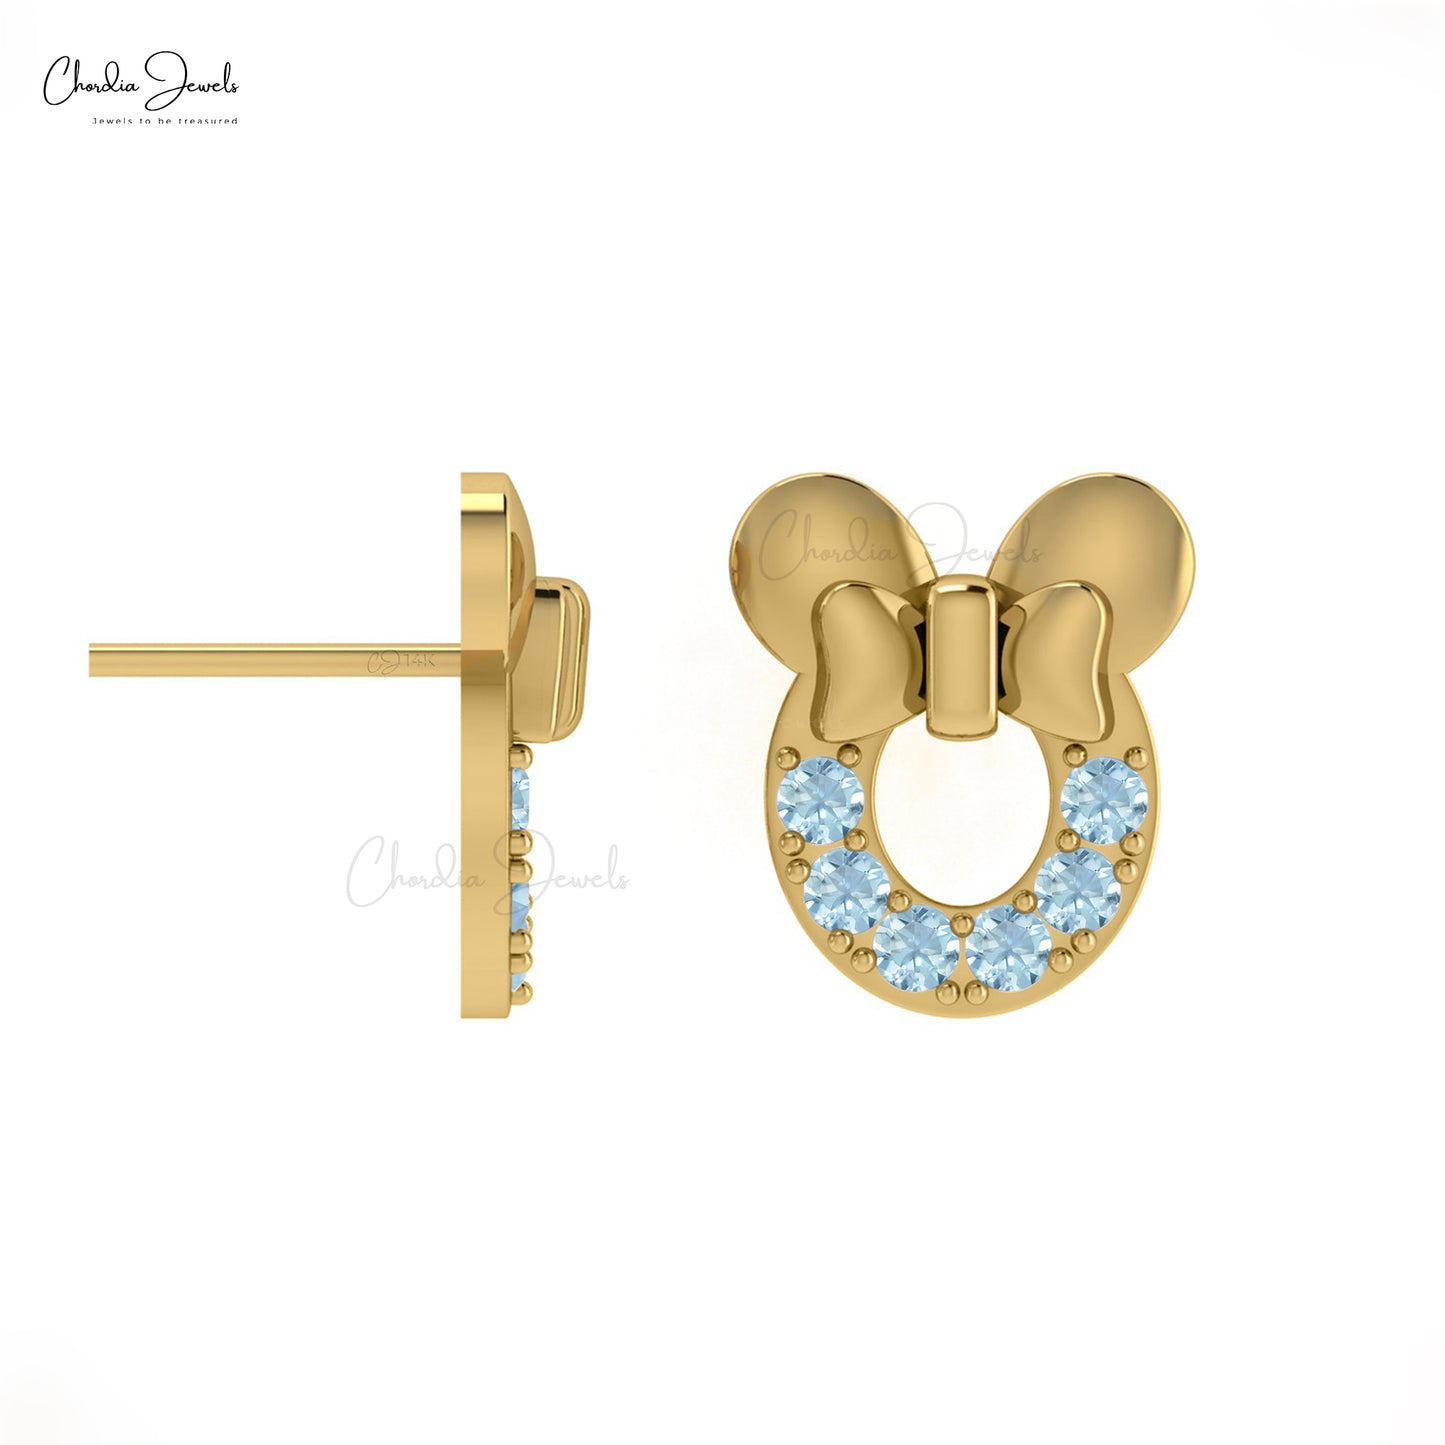 Solid 14k Gold Mickey Mouse Earrings with Genuine 2mm Aquamarine Dainty Earrings For Women